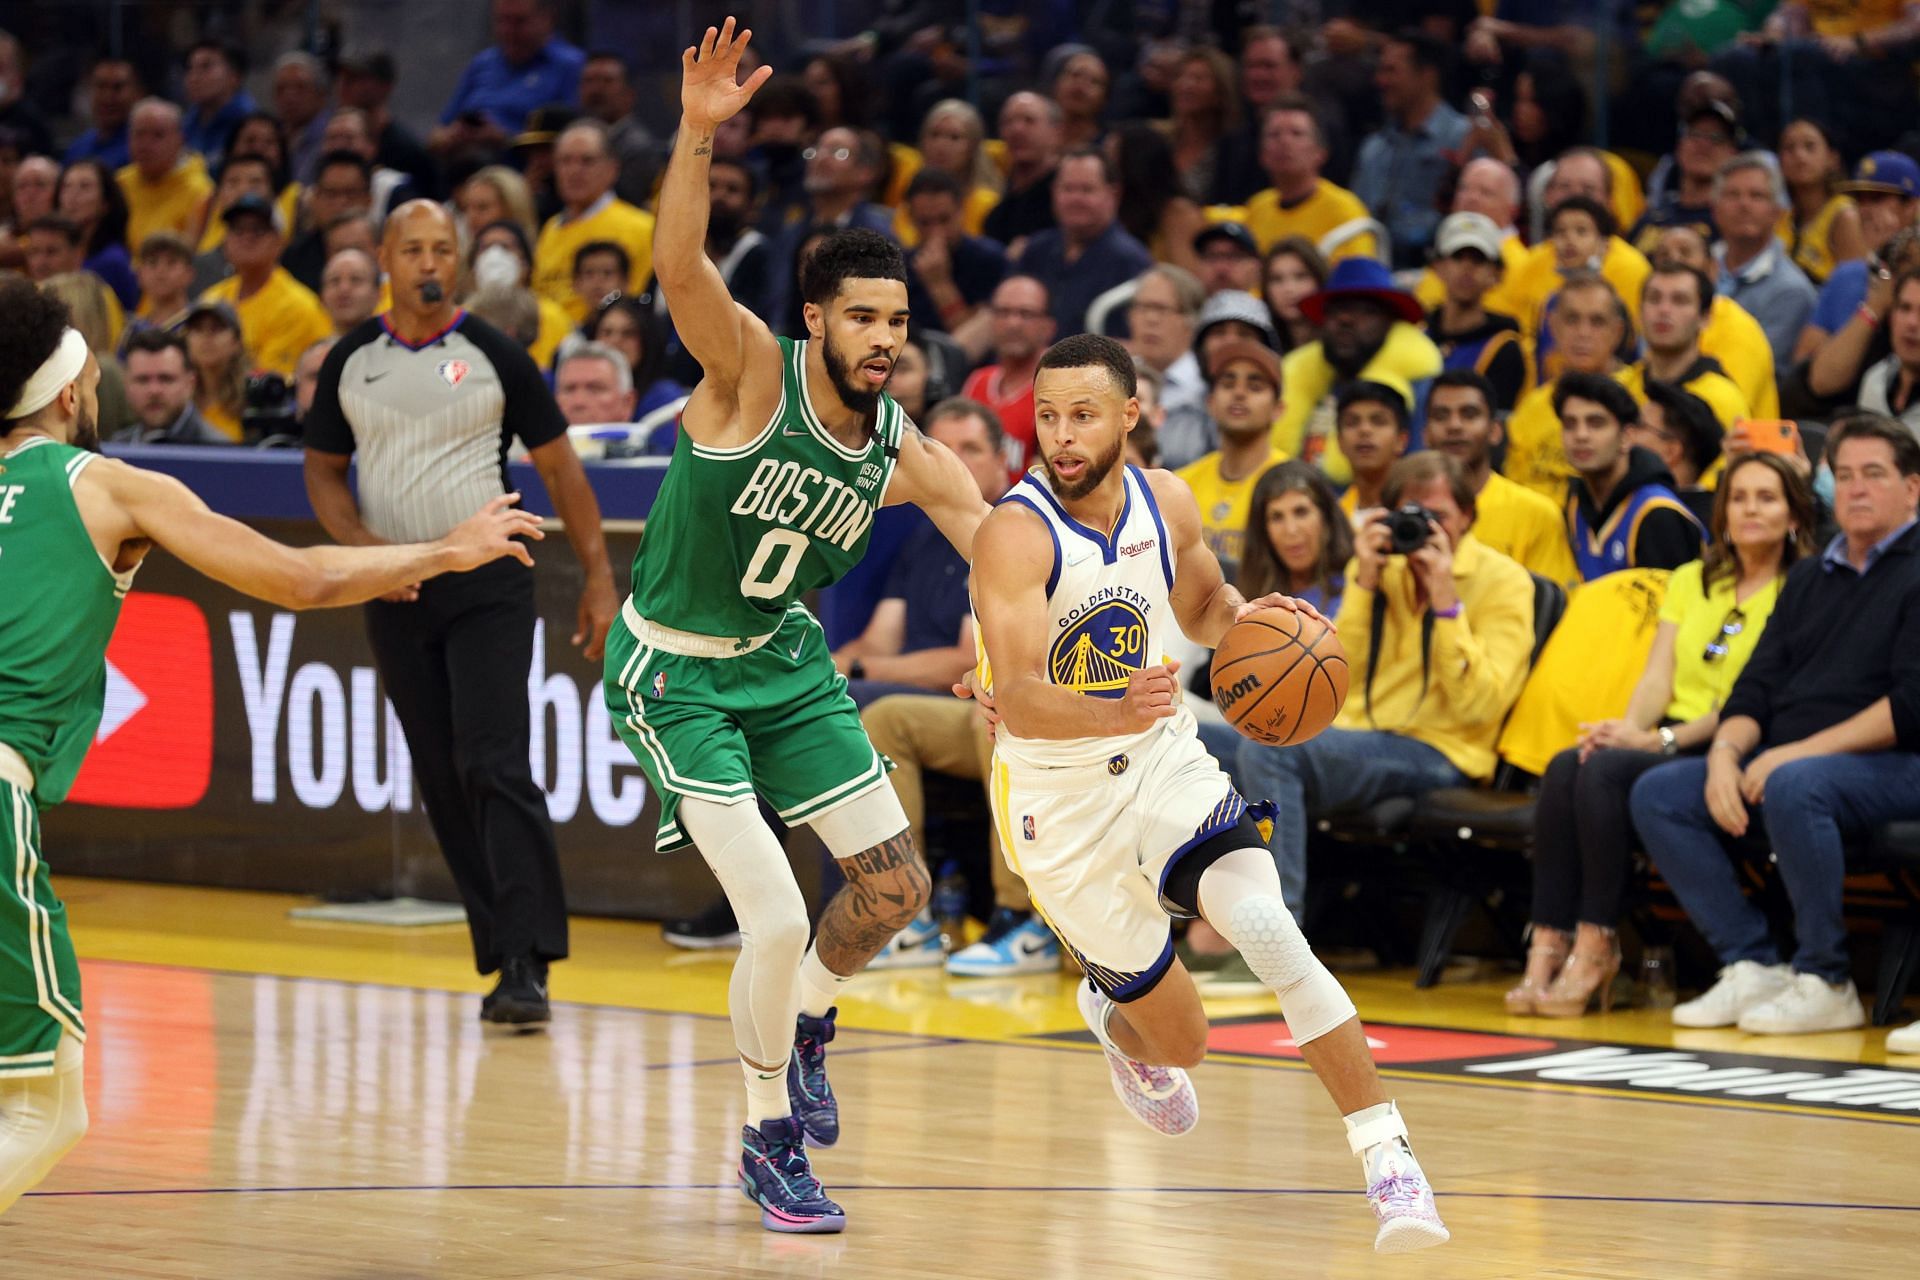 Stephen Curry of the Golden State Warriors dribbles against Jayson Tatum of the Boston Celtics.